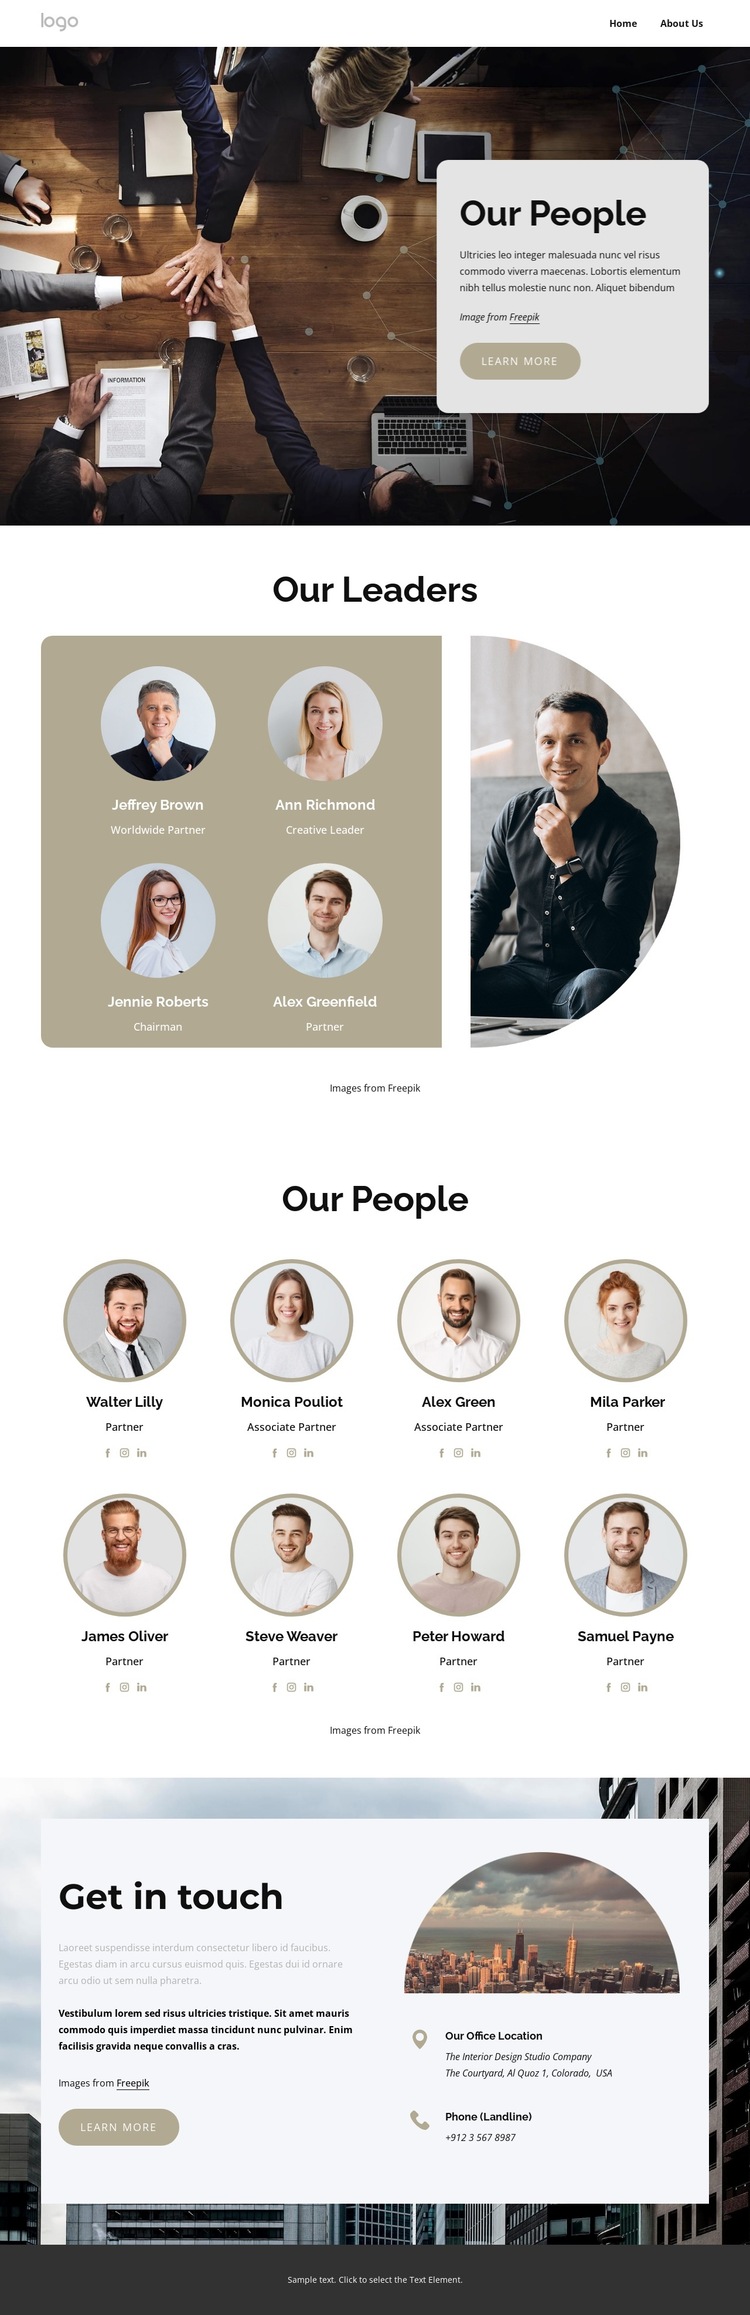 We believe our people deserve rewards HTML5 Template